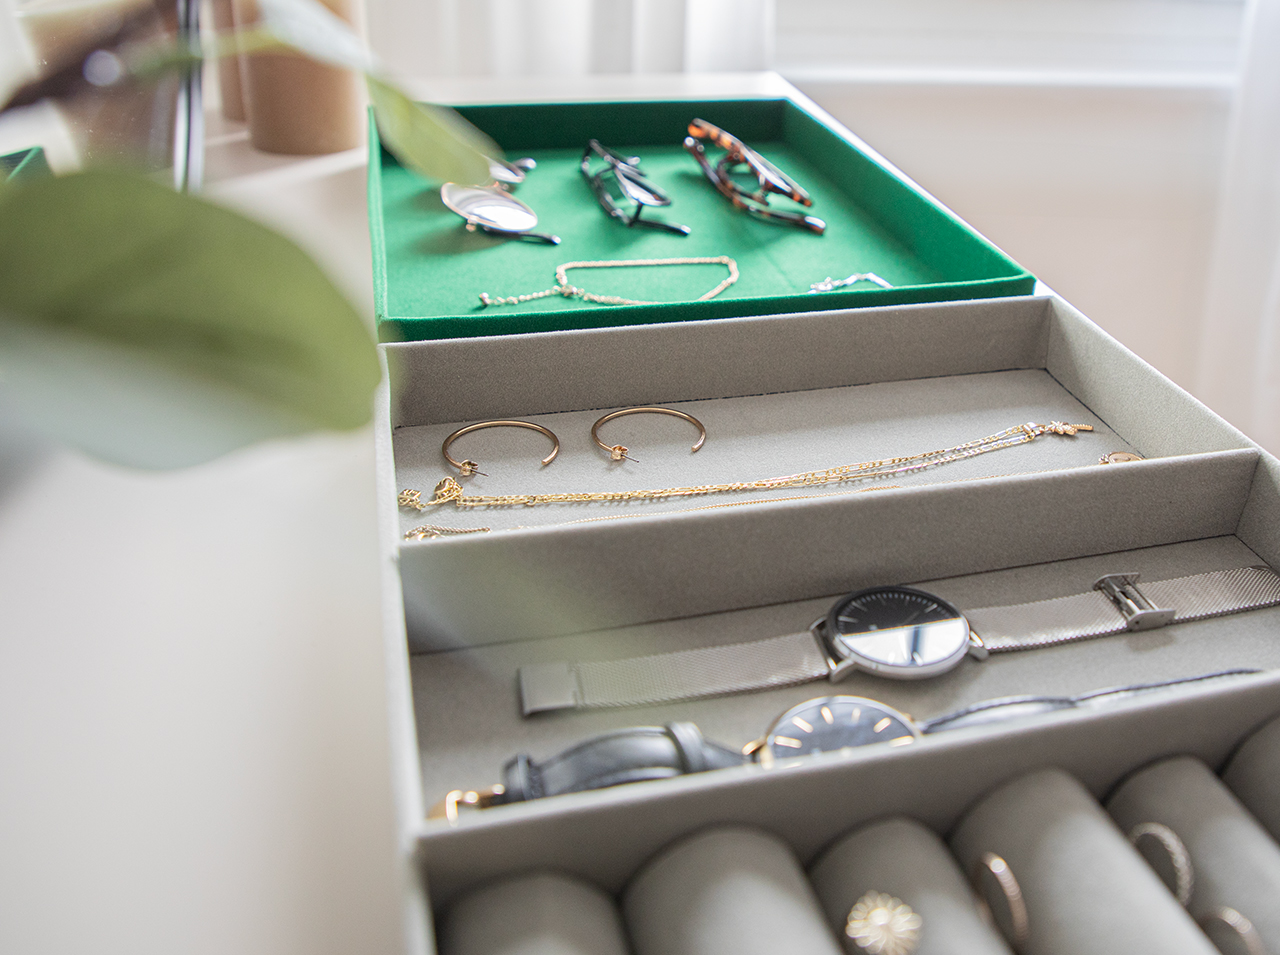 Tray for storing jewelry with inserted rings and other jewelry items on a light gray velvet surface.